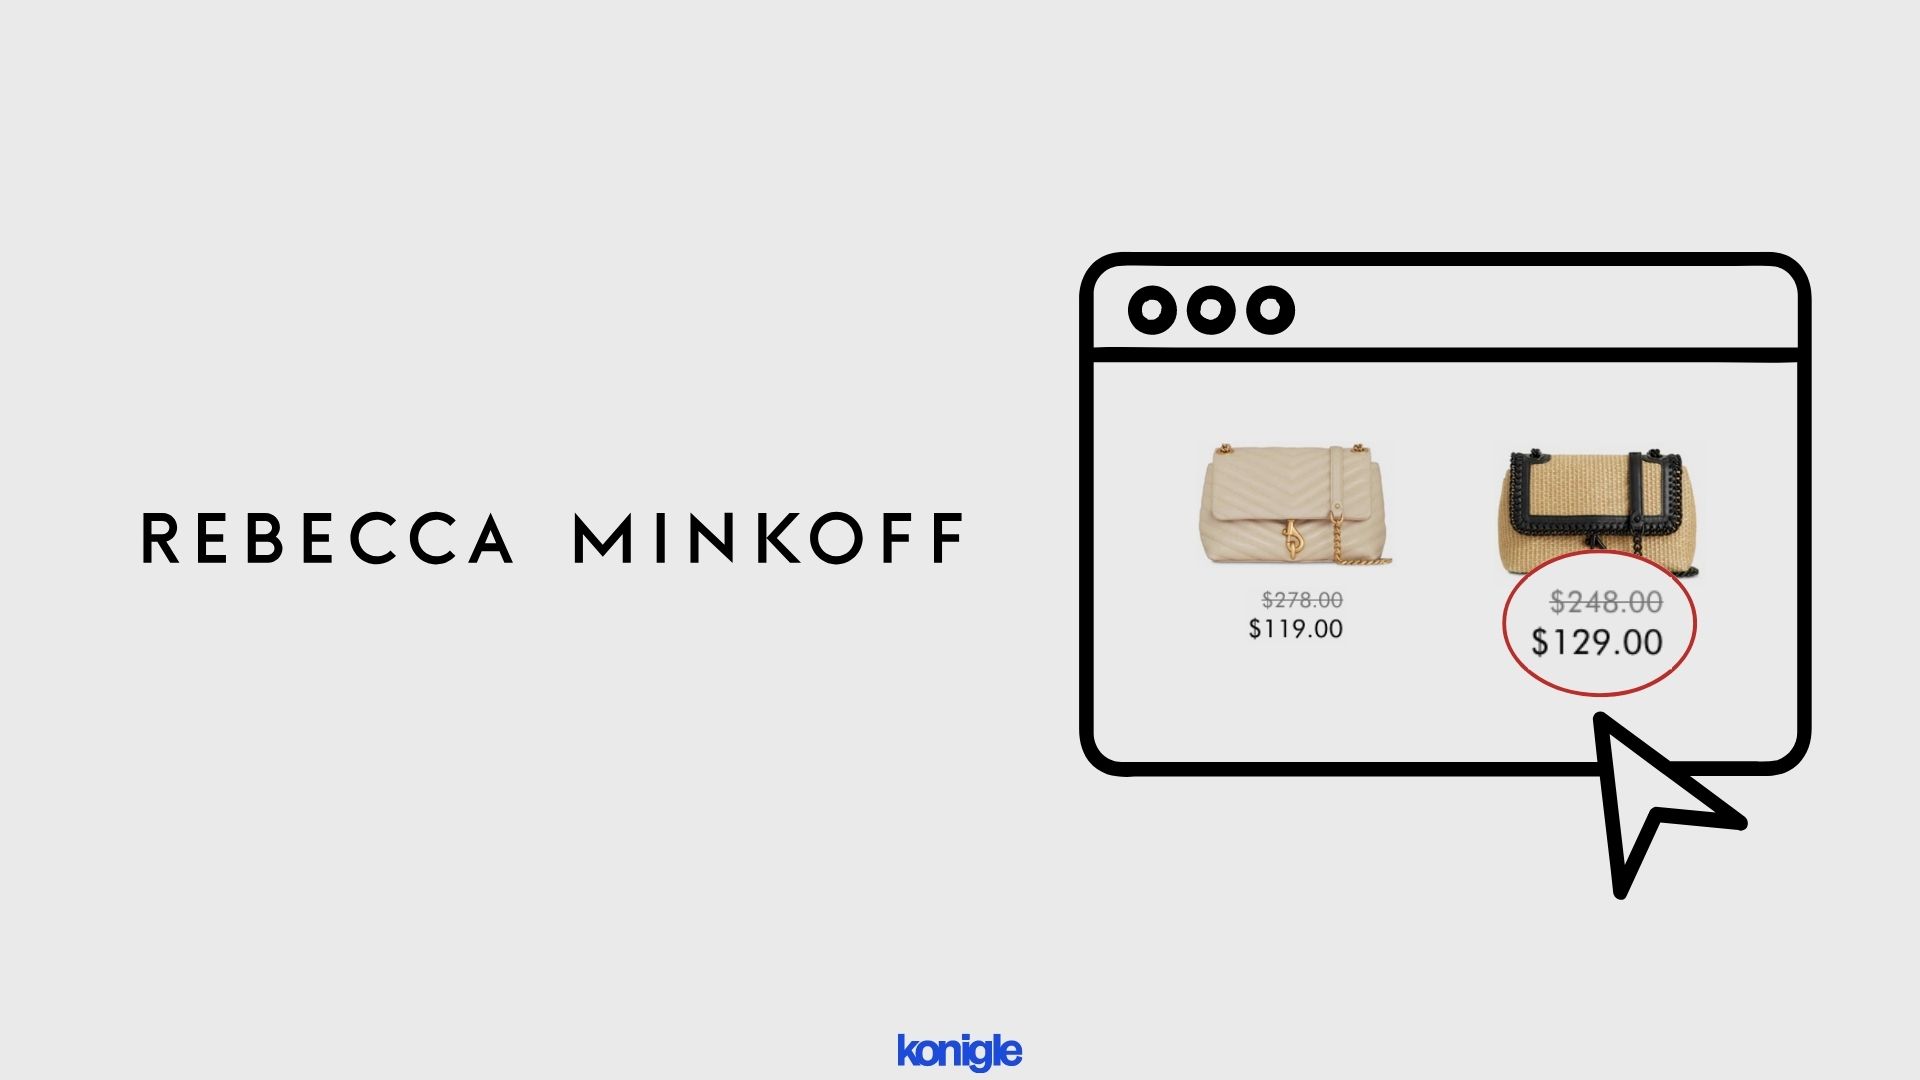 This is how Rebecca Minkoff display prices to improve conversion rates.